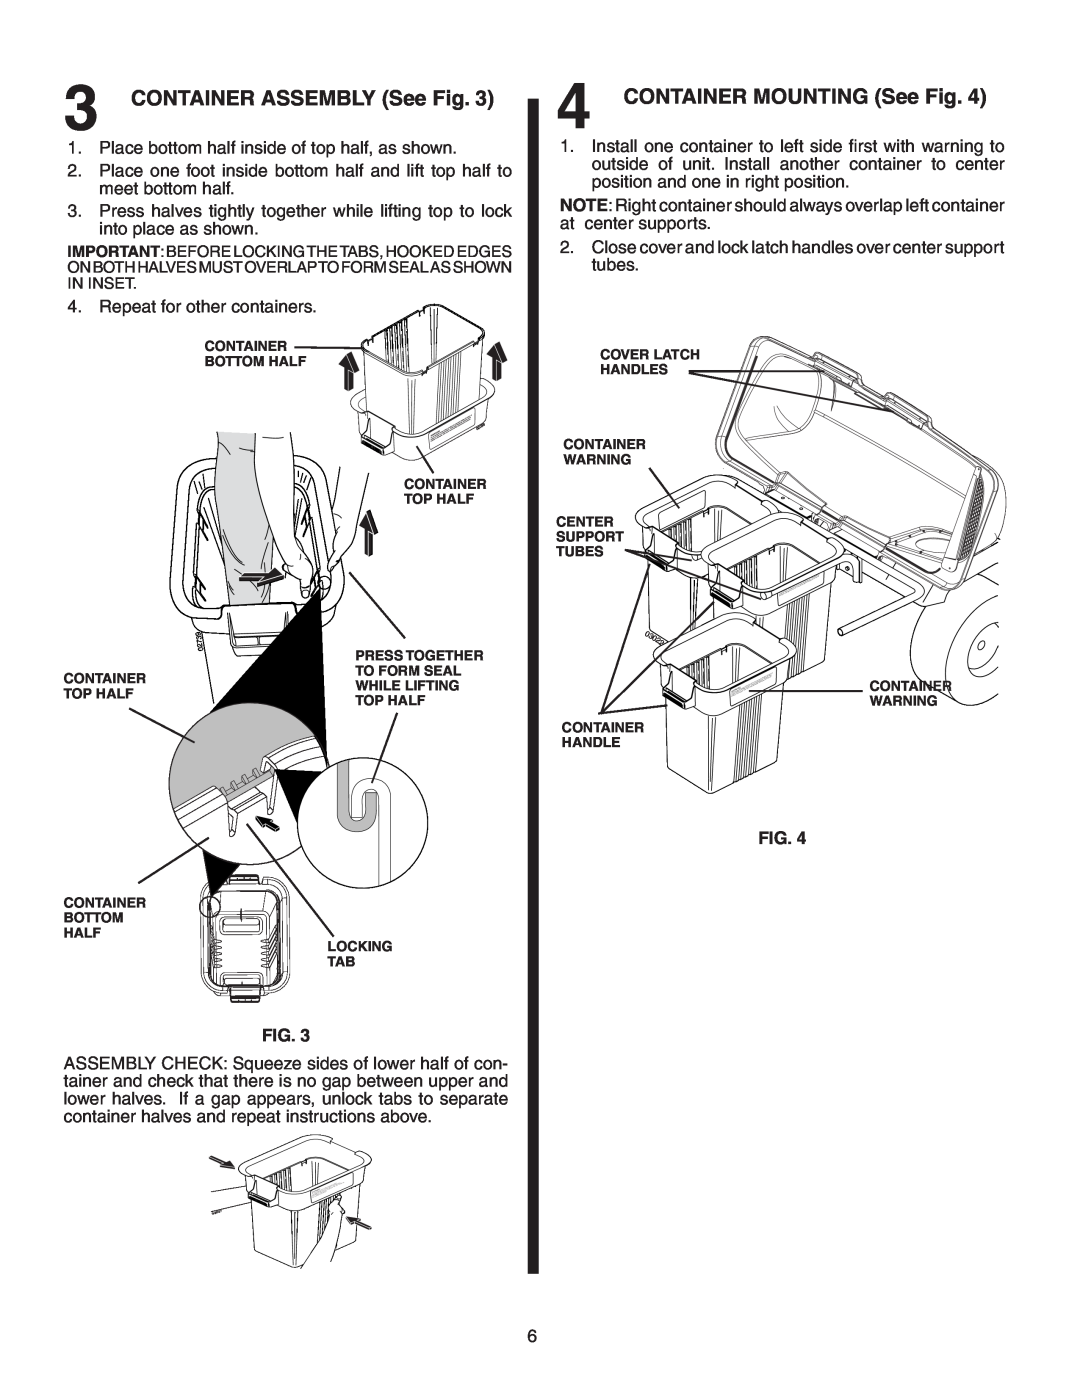 Poulan 960 72 00-09, GTT348, 532402341, 96072000900 owner manual CONTAINER ASSEMBLY See Fig, CONTAINER MOUNTING See Fig 